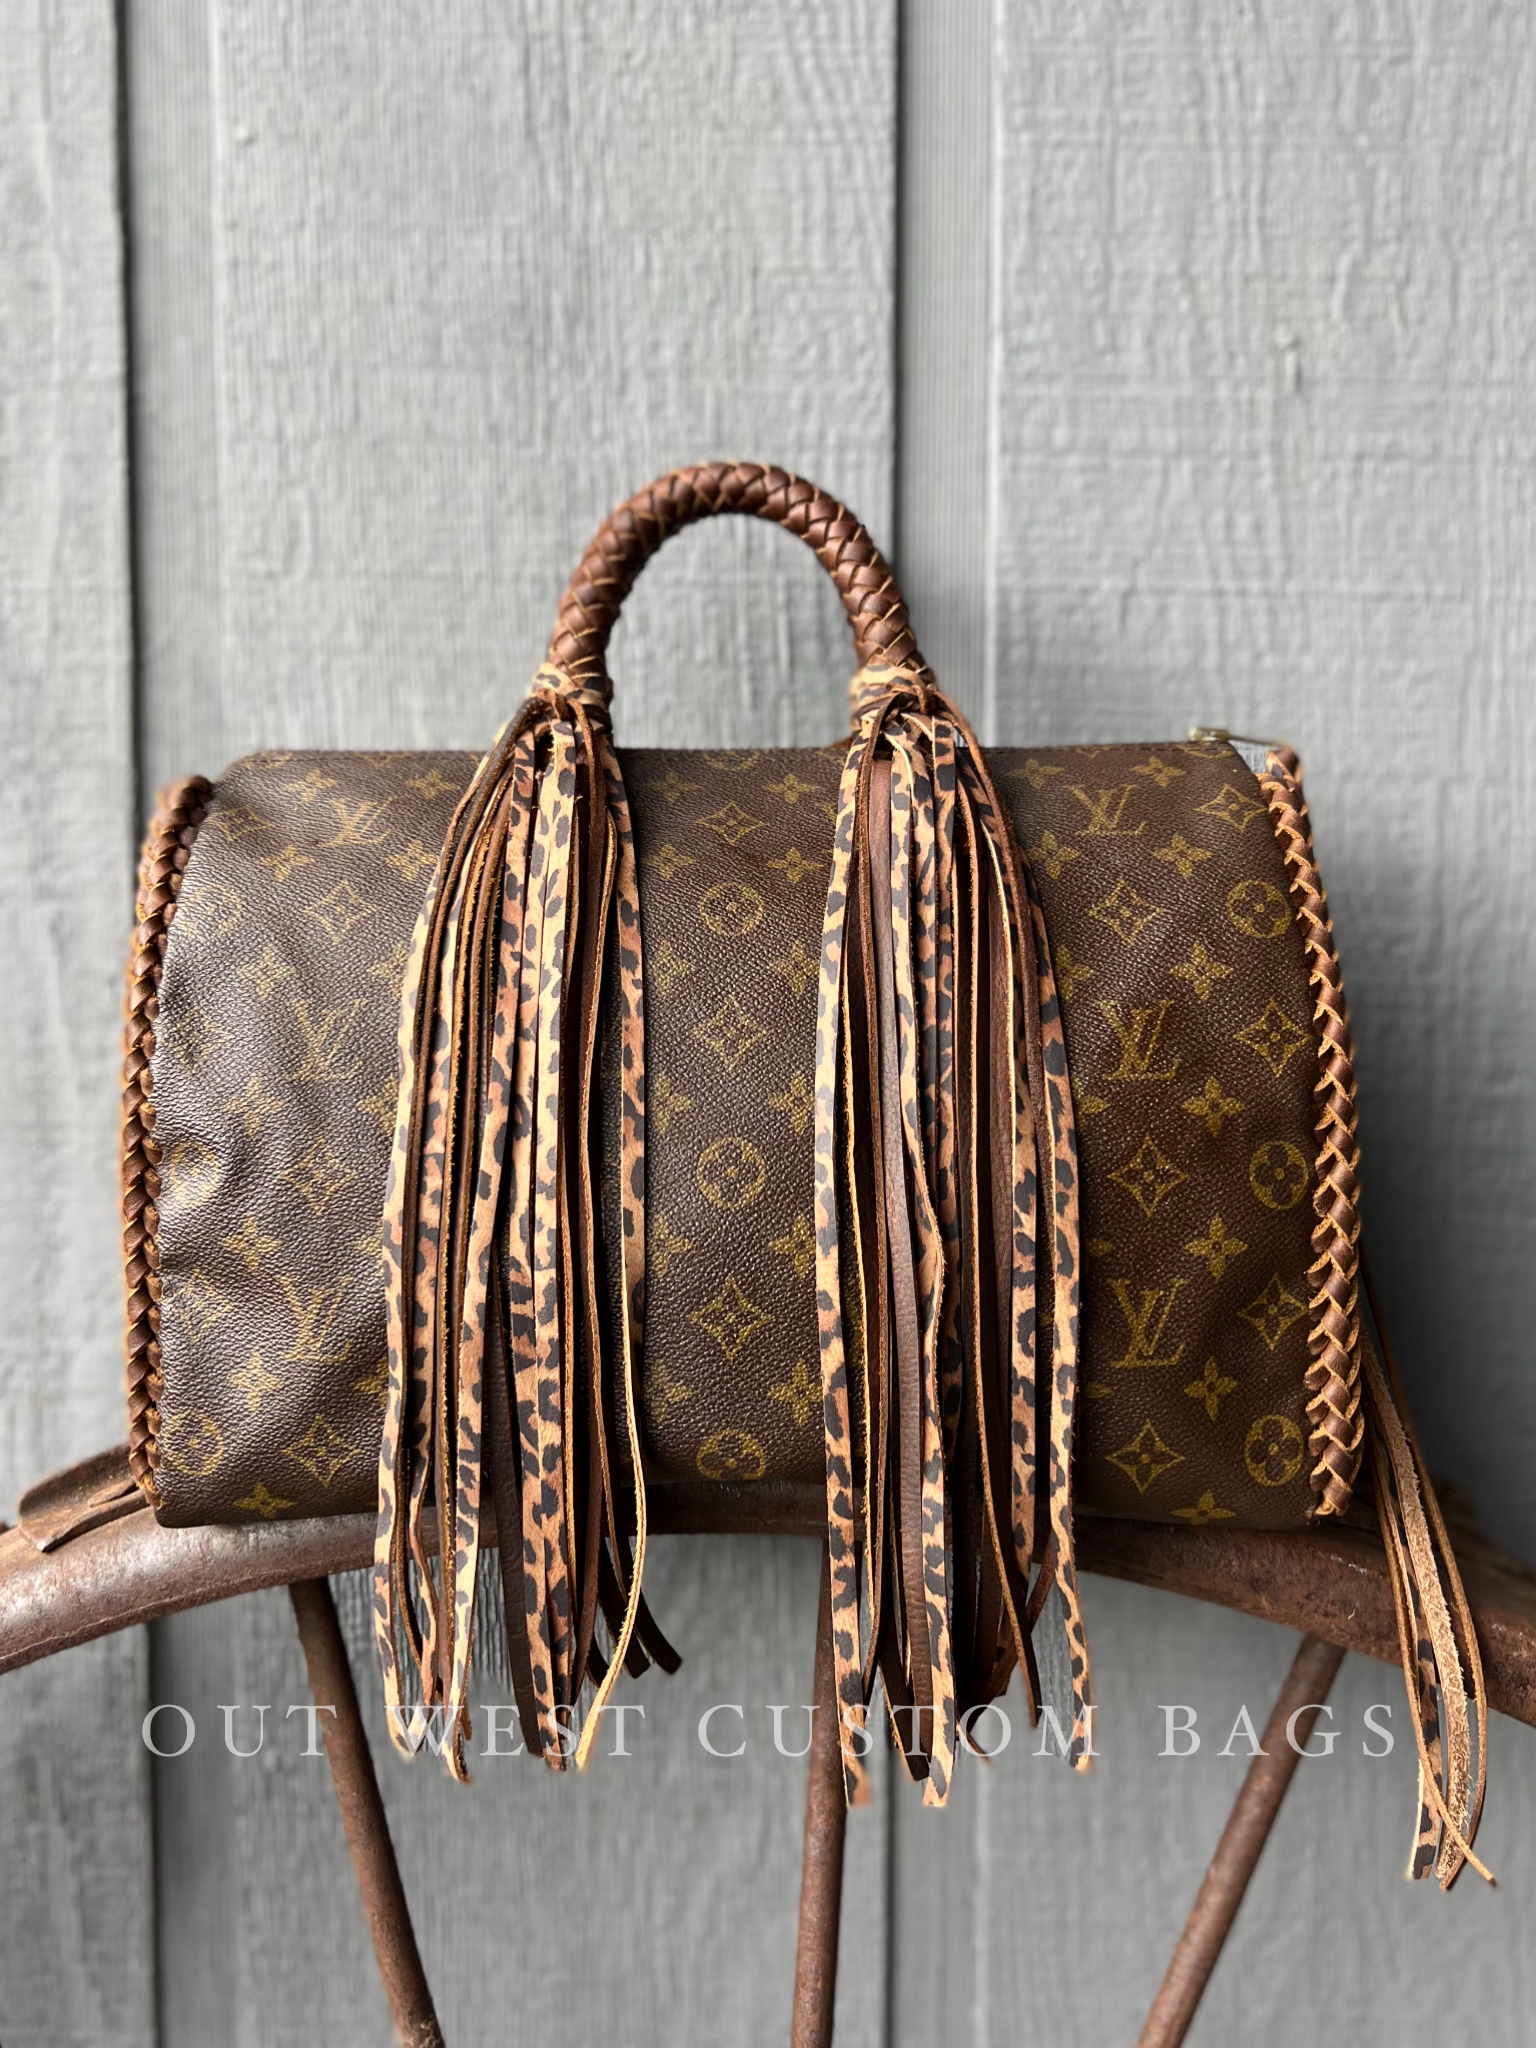 Louis Vuitton Personalized Speedy 30 Review